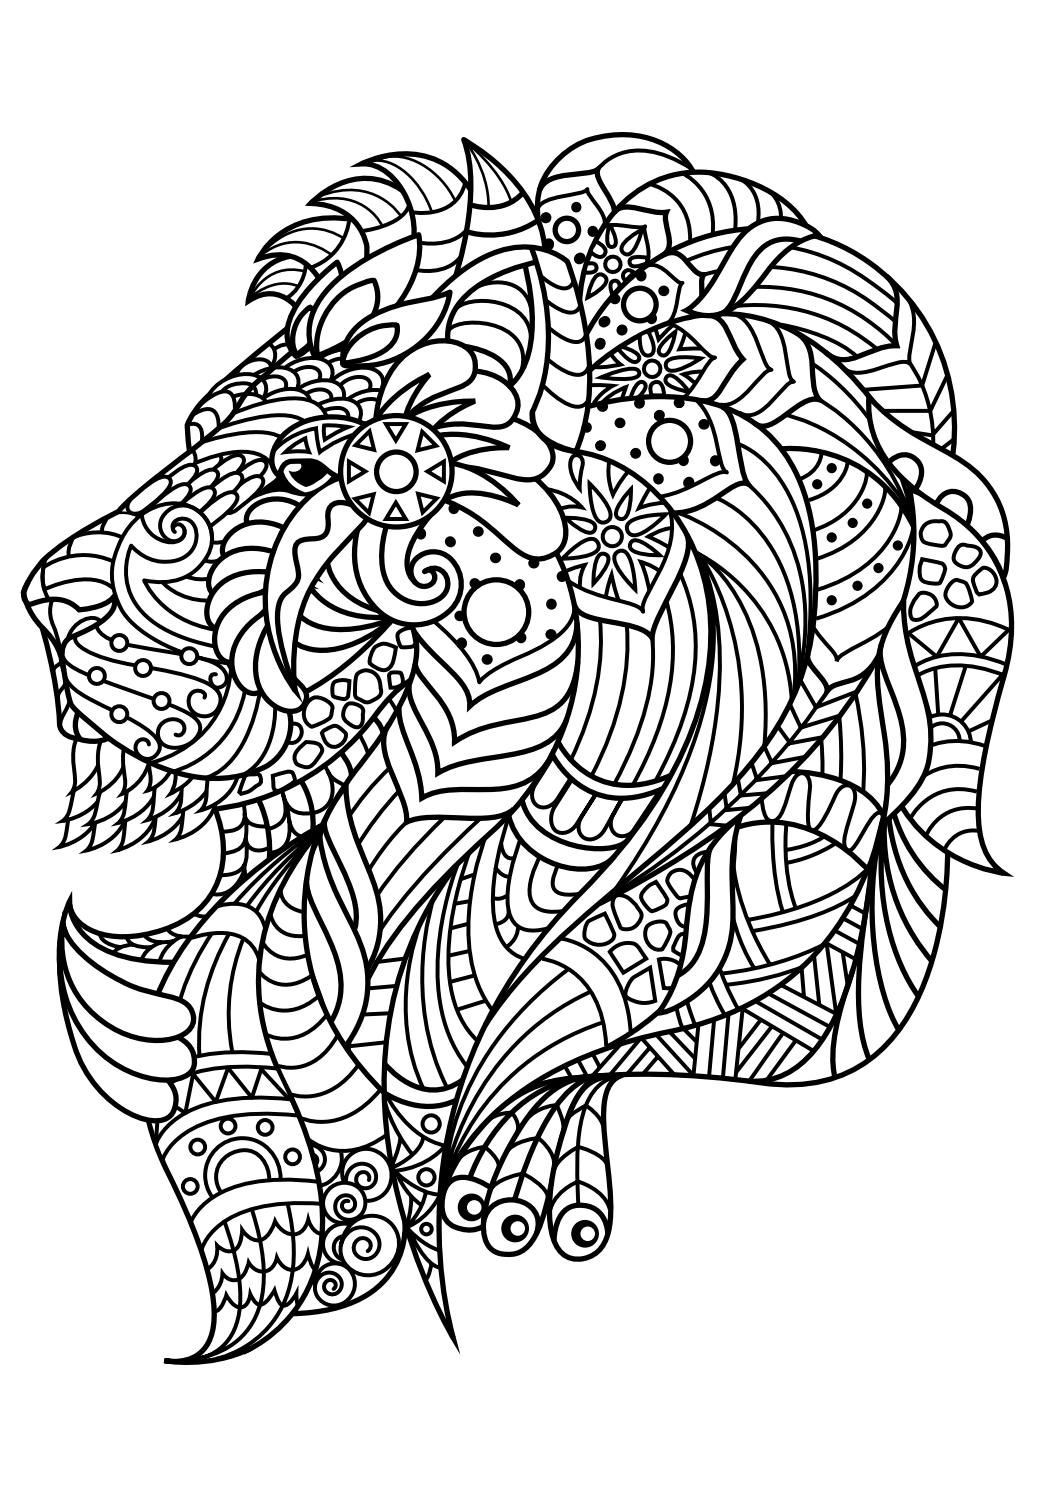 Lion Coloring Pages For Adults
 Animal coloring pages pdf